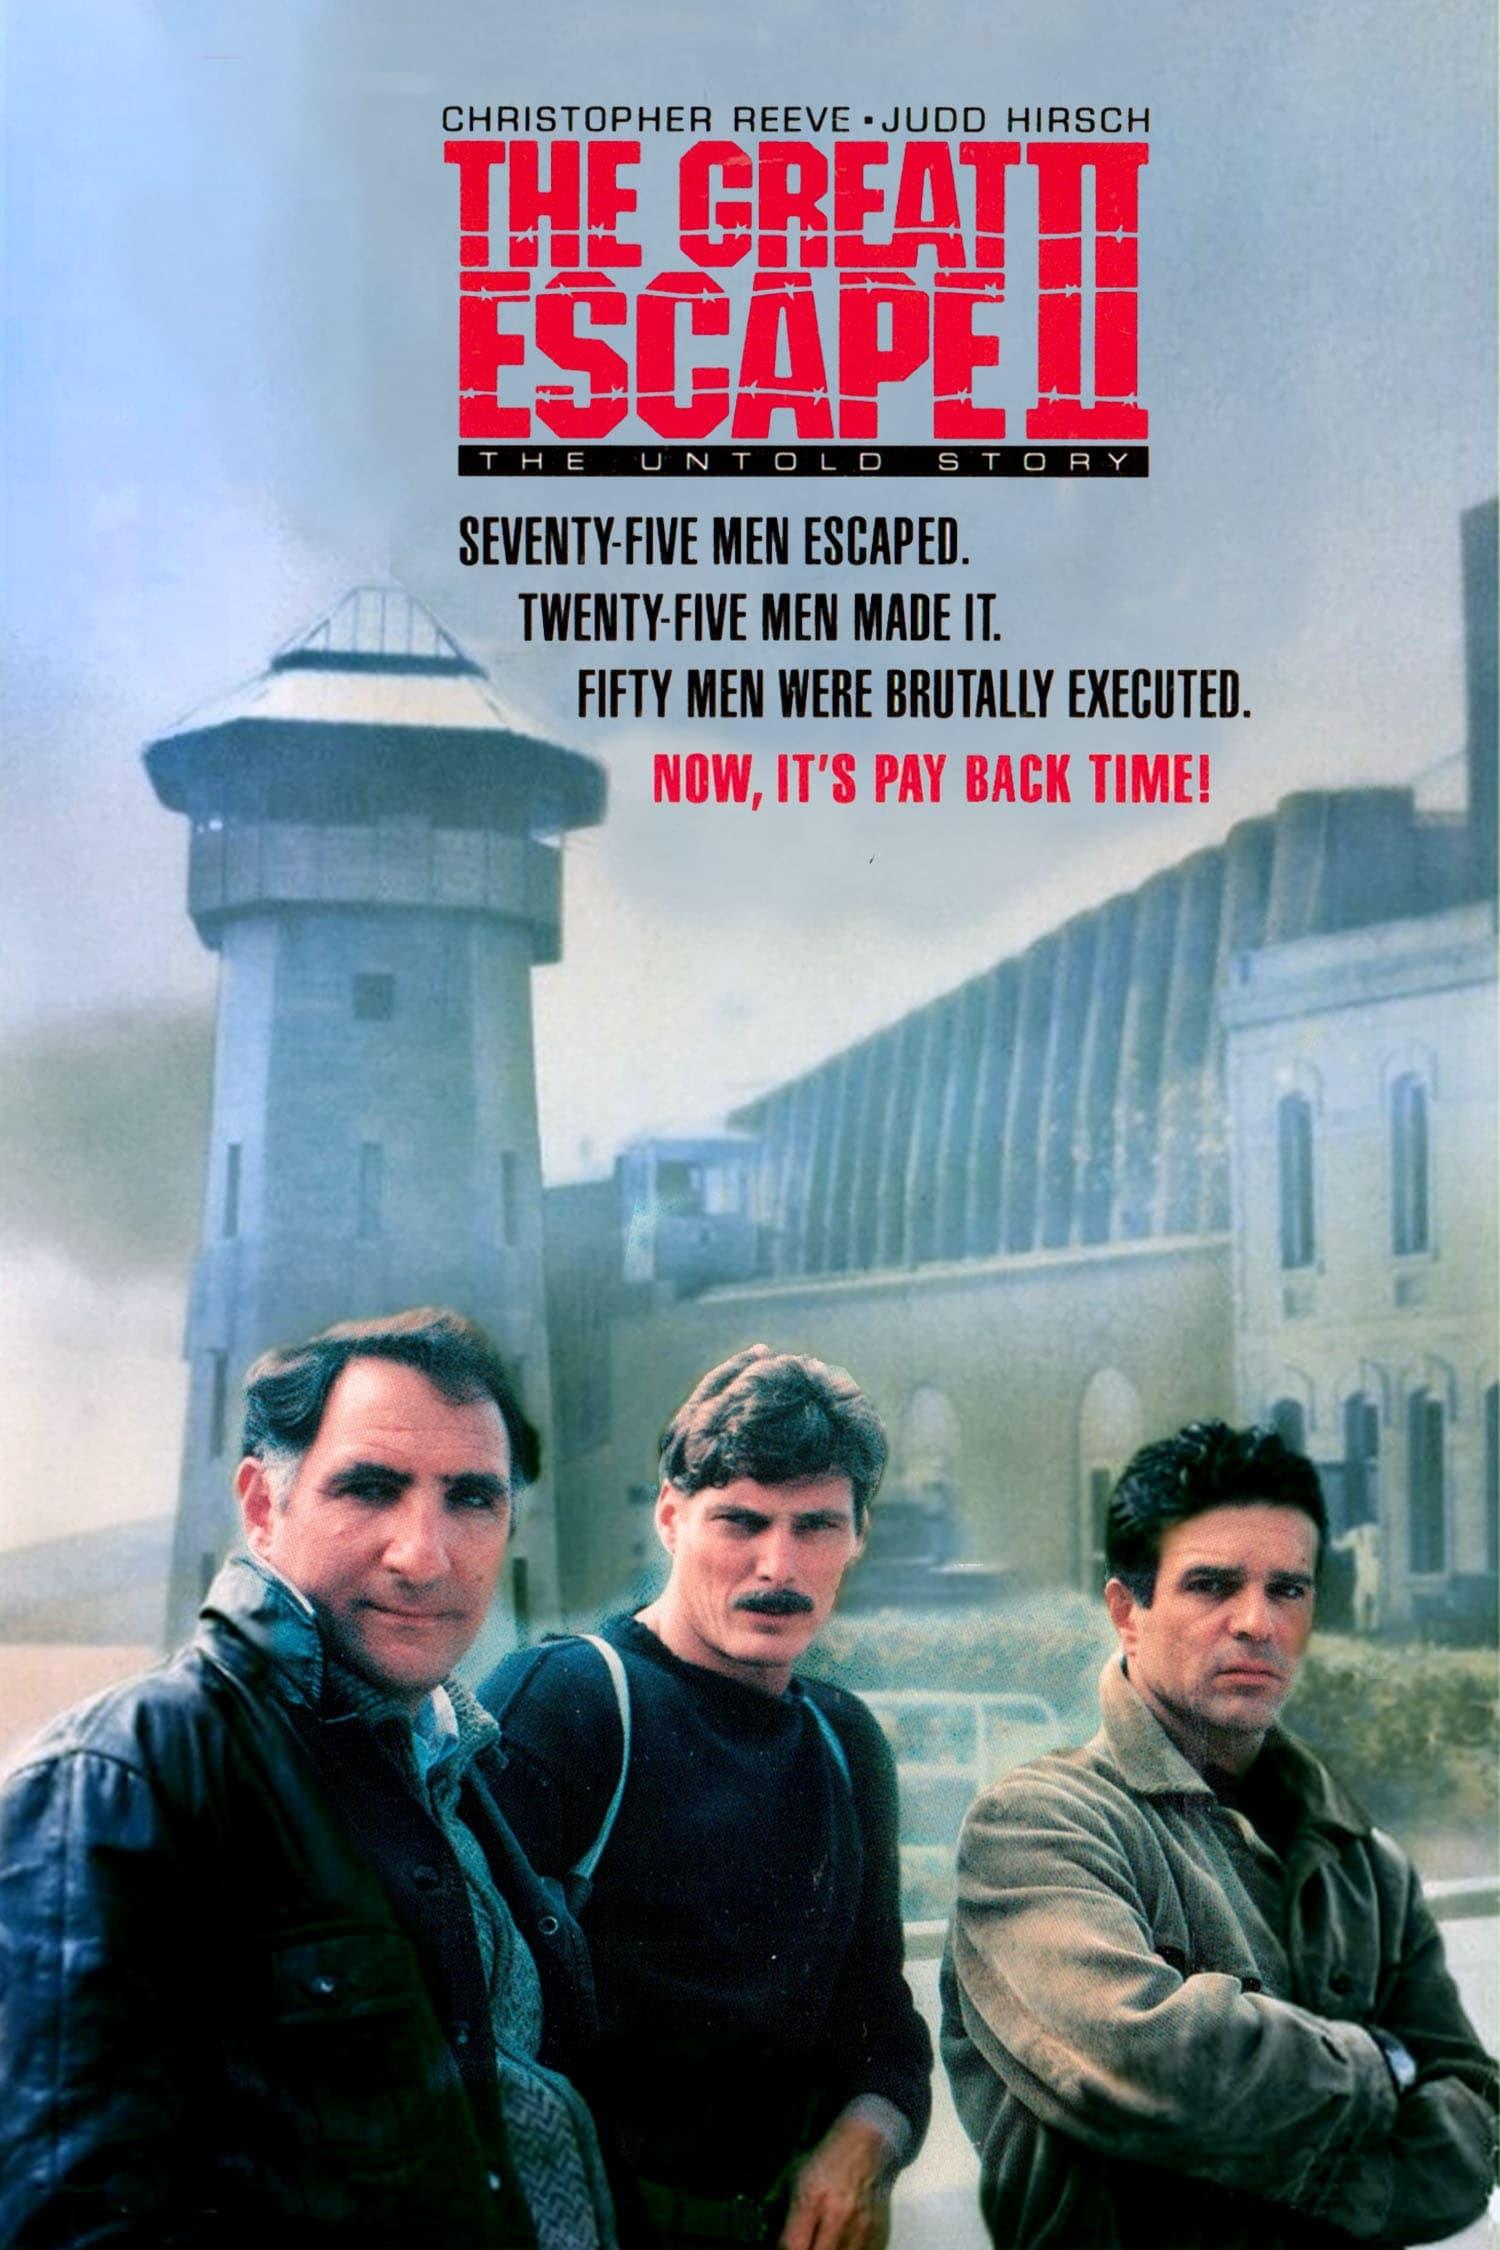 The Great Escape II: The Untold Story poster